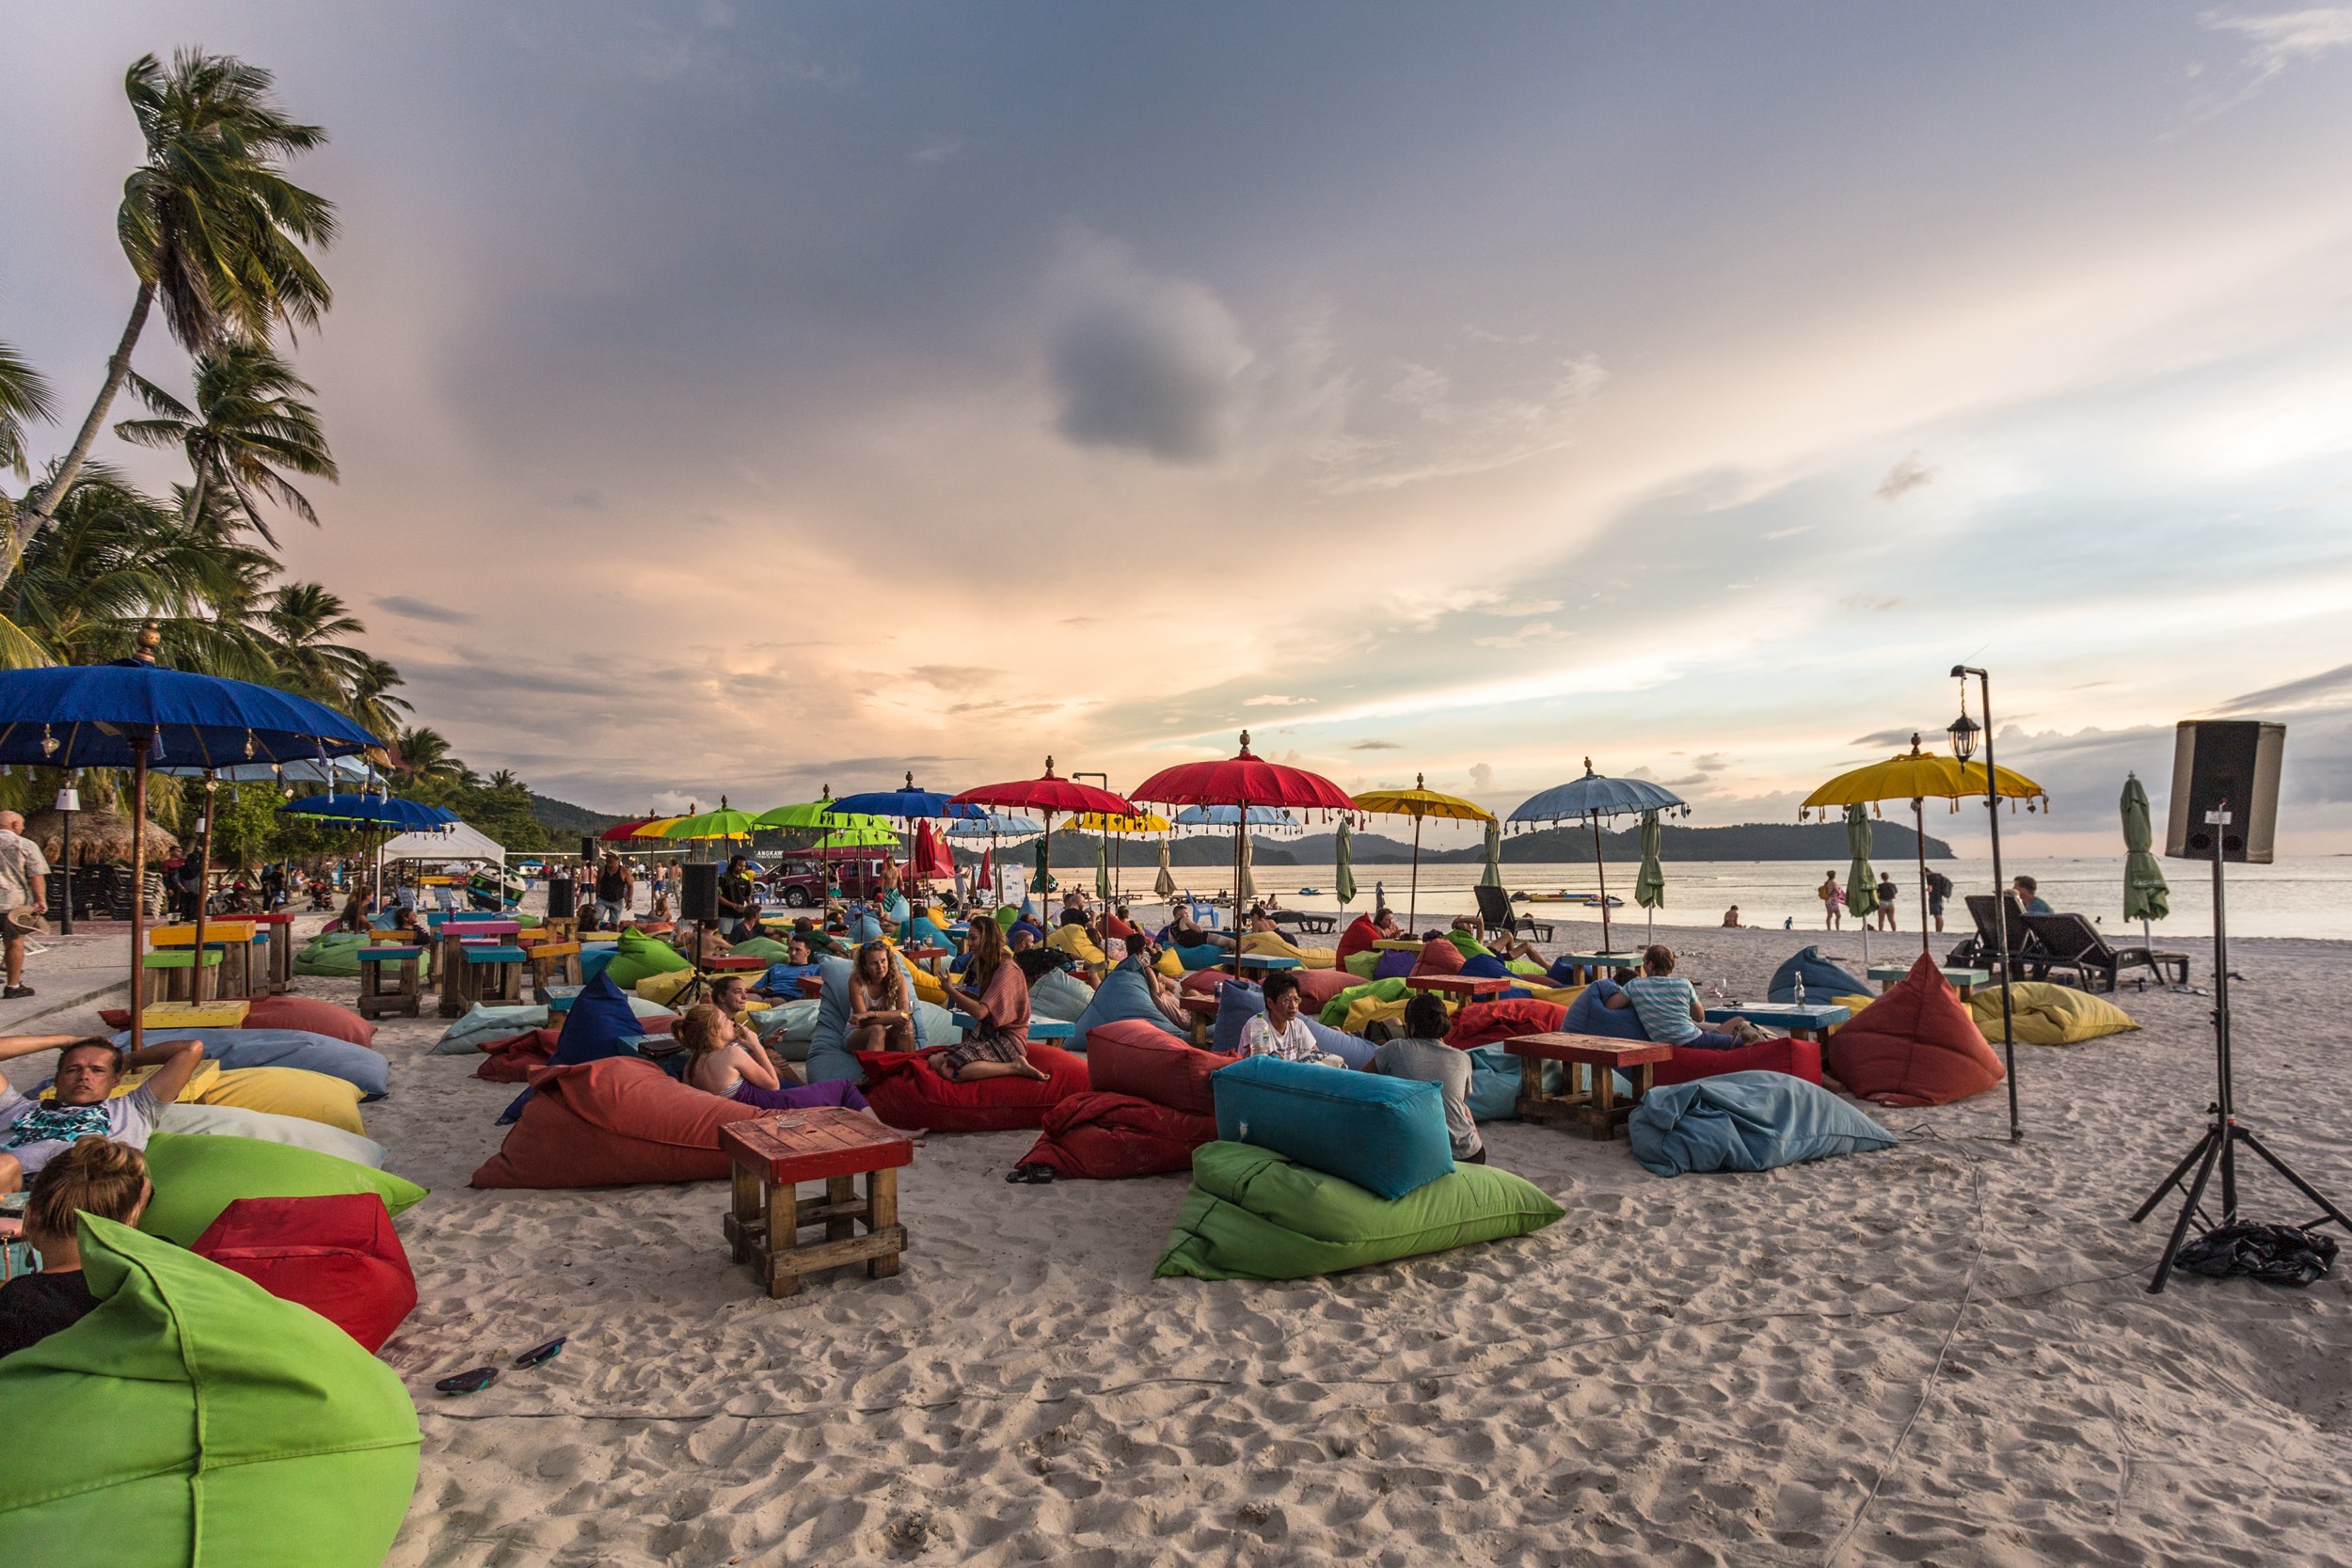 Langkawi nightlife - people enjoy sunset with drinks on the beach